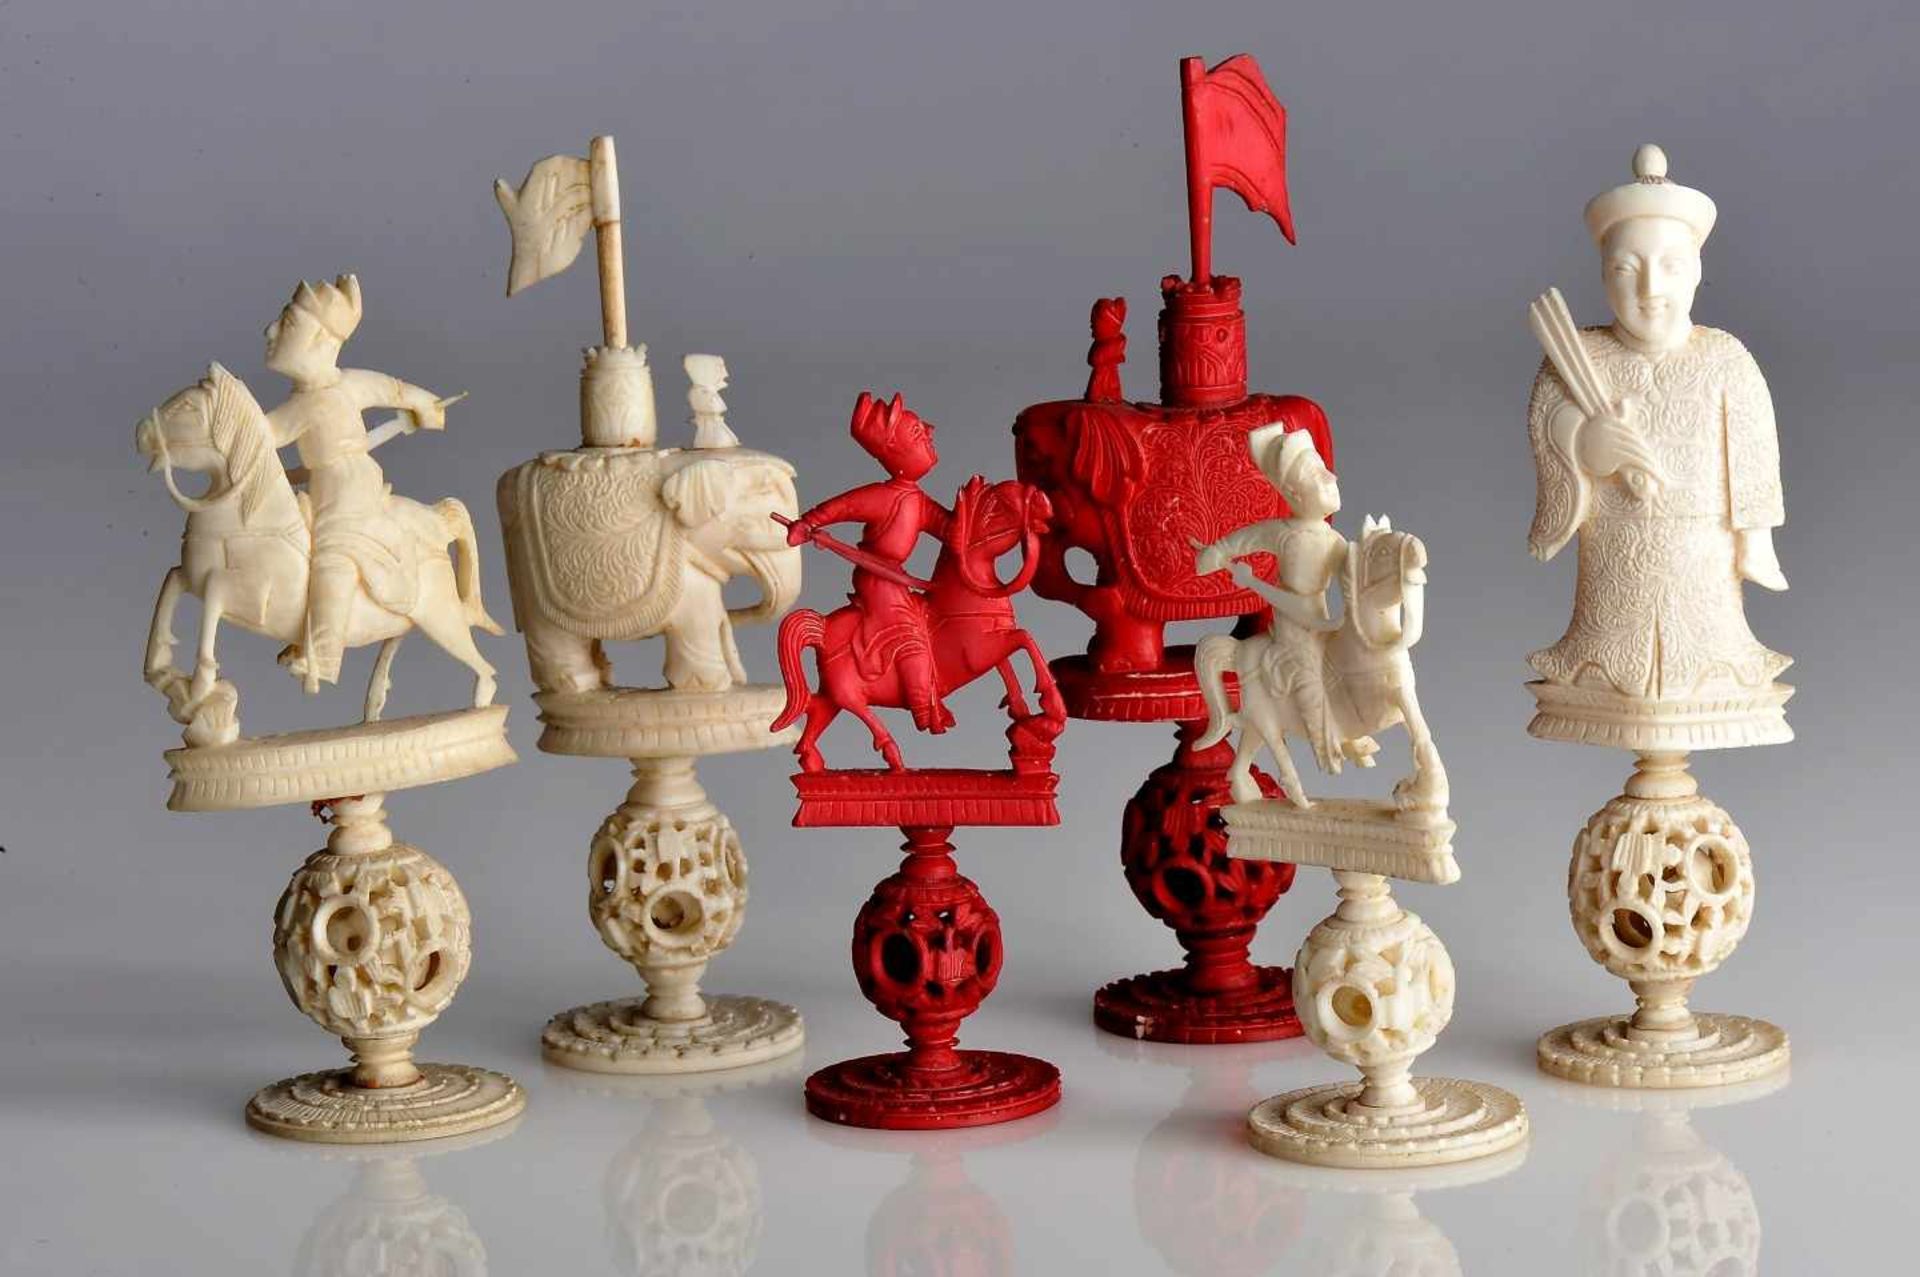 Chess PiecesChess Pieces, carved ivory with all the pieces based on "Ball of happiness", one of - Image 4 of 5